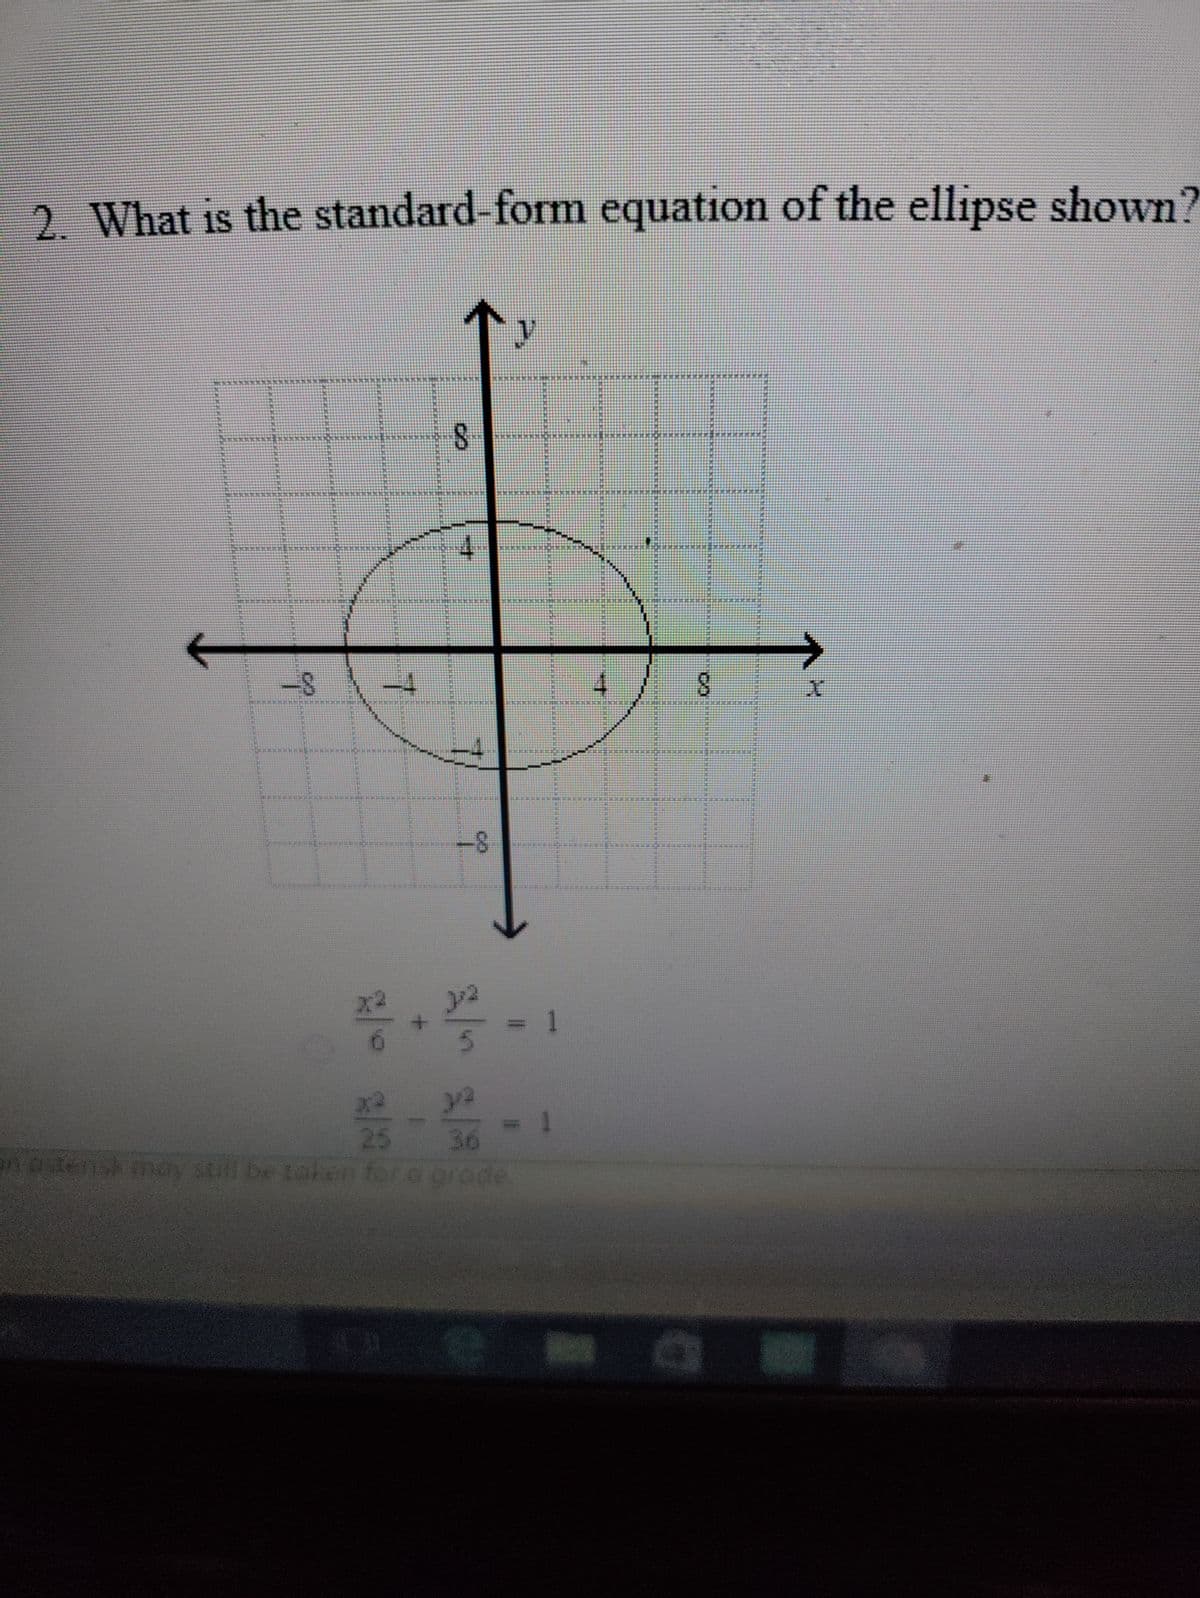 2. What is the standard-form equation of the ellipse shown?
←
Berm
-8
*****
8
x²
4
8
322
2.2²-
y
y/²
H
= 1
25
an ostensk may still be taken for a grade.
+
................
8
Dema
X